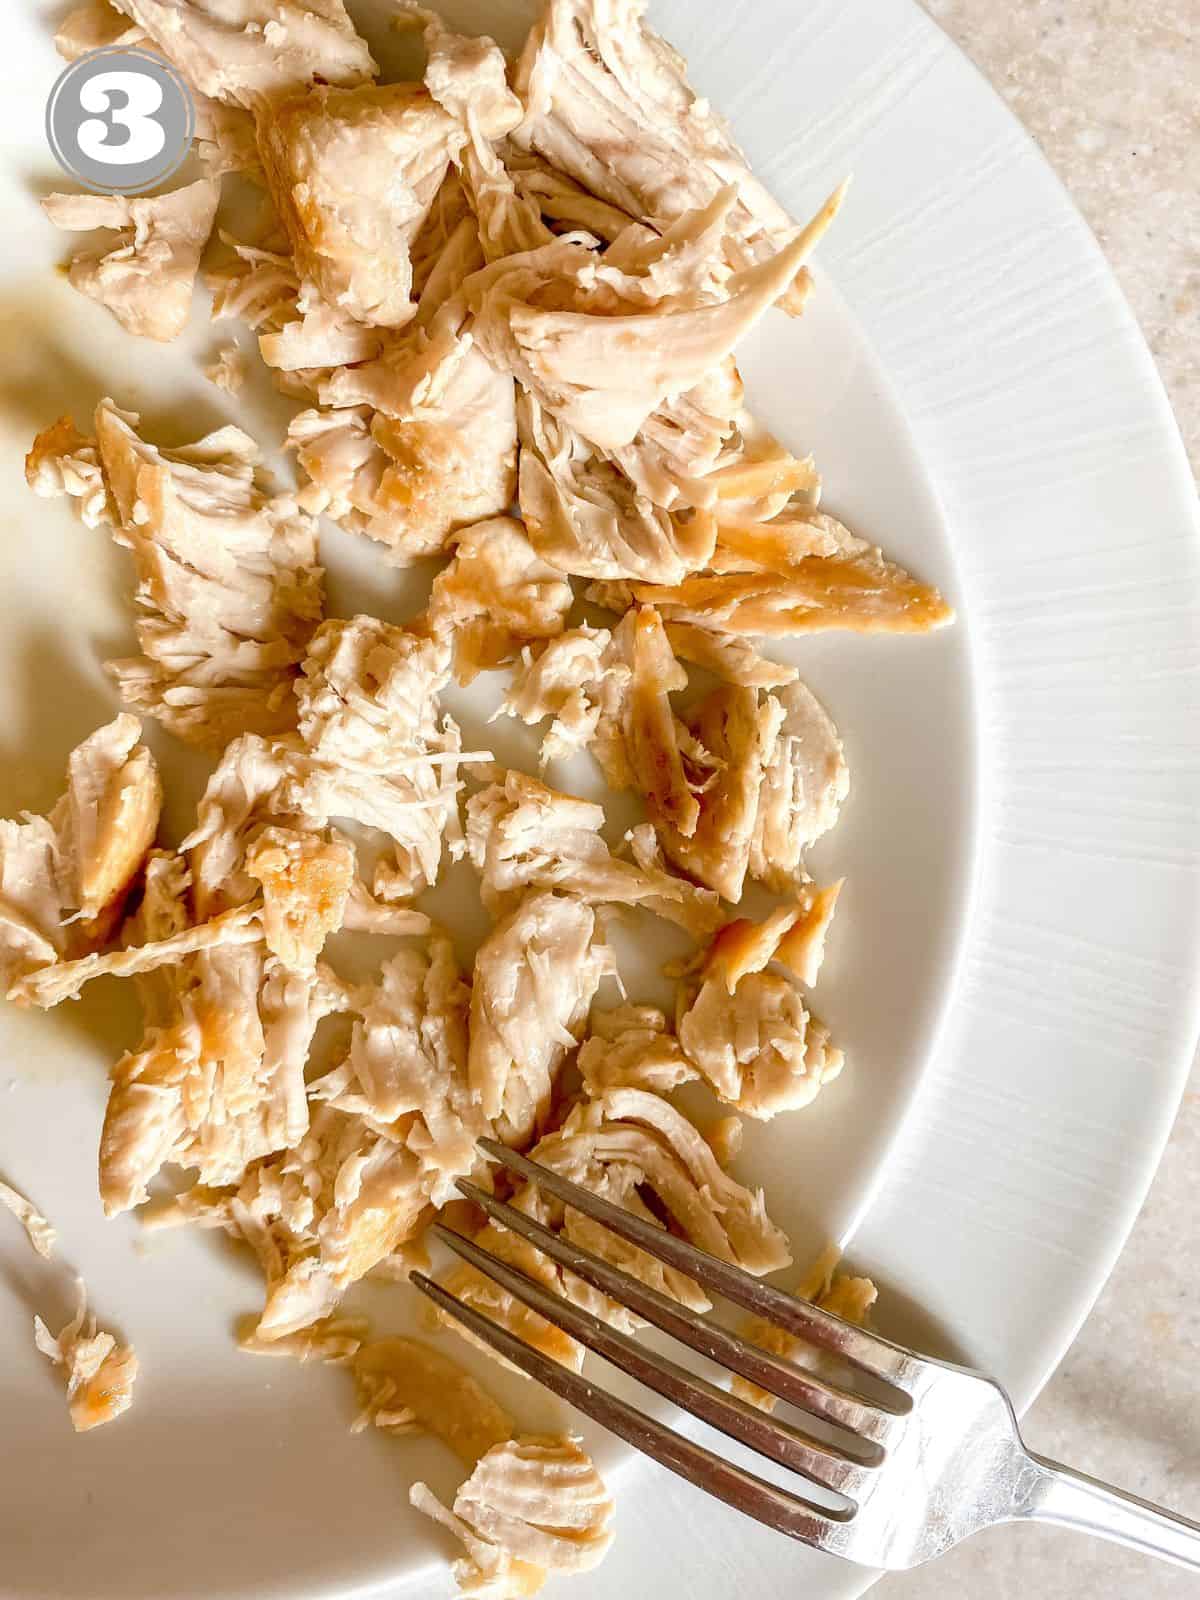 shredded turkey and a fork on a white plate labelled number three.